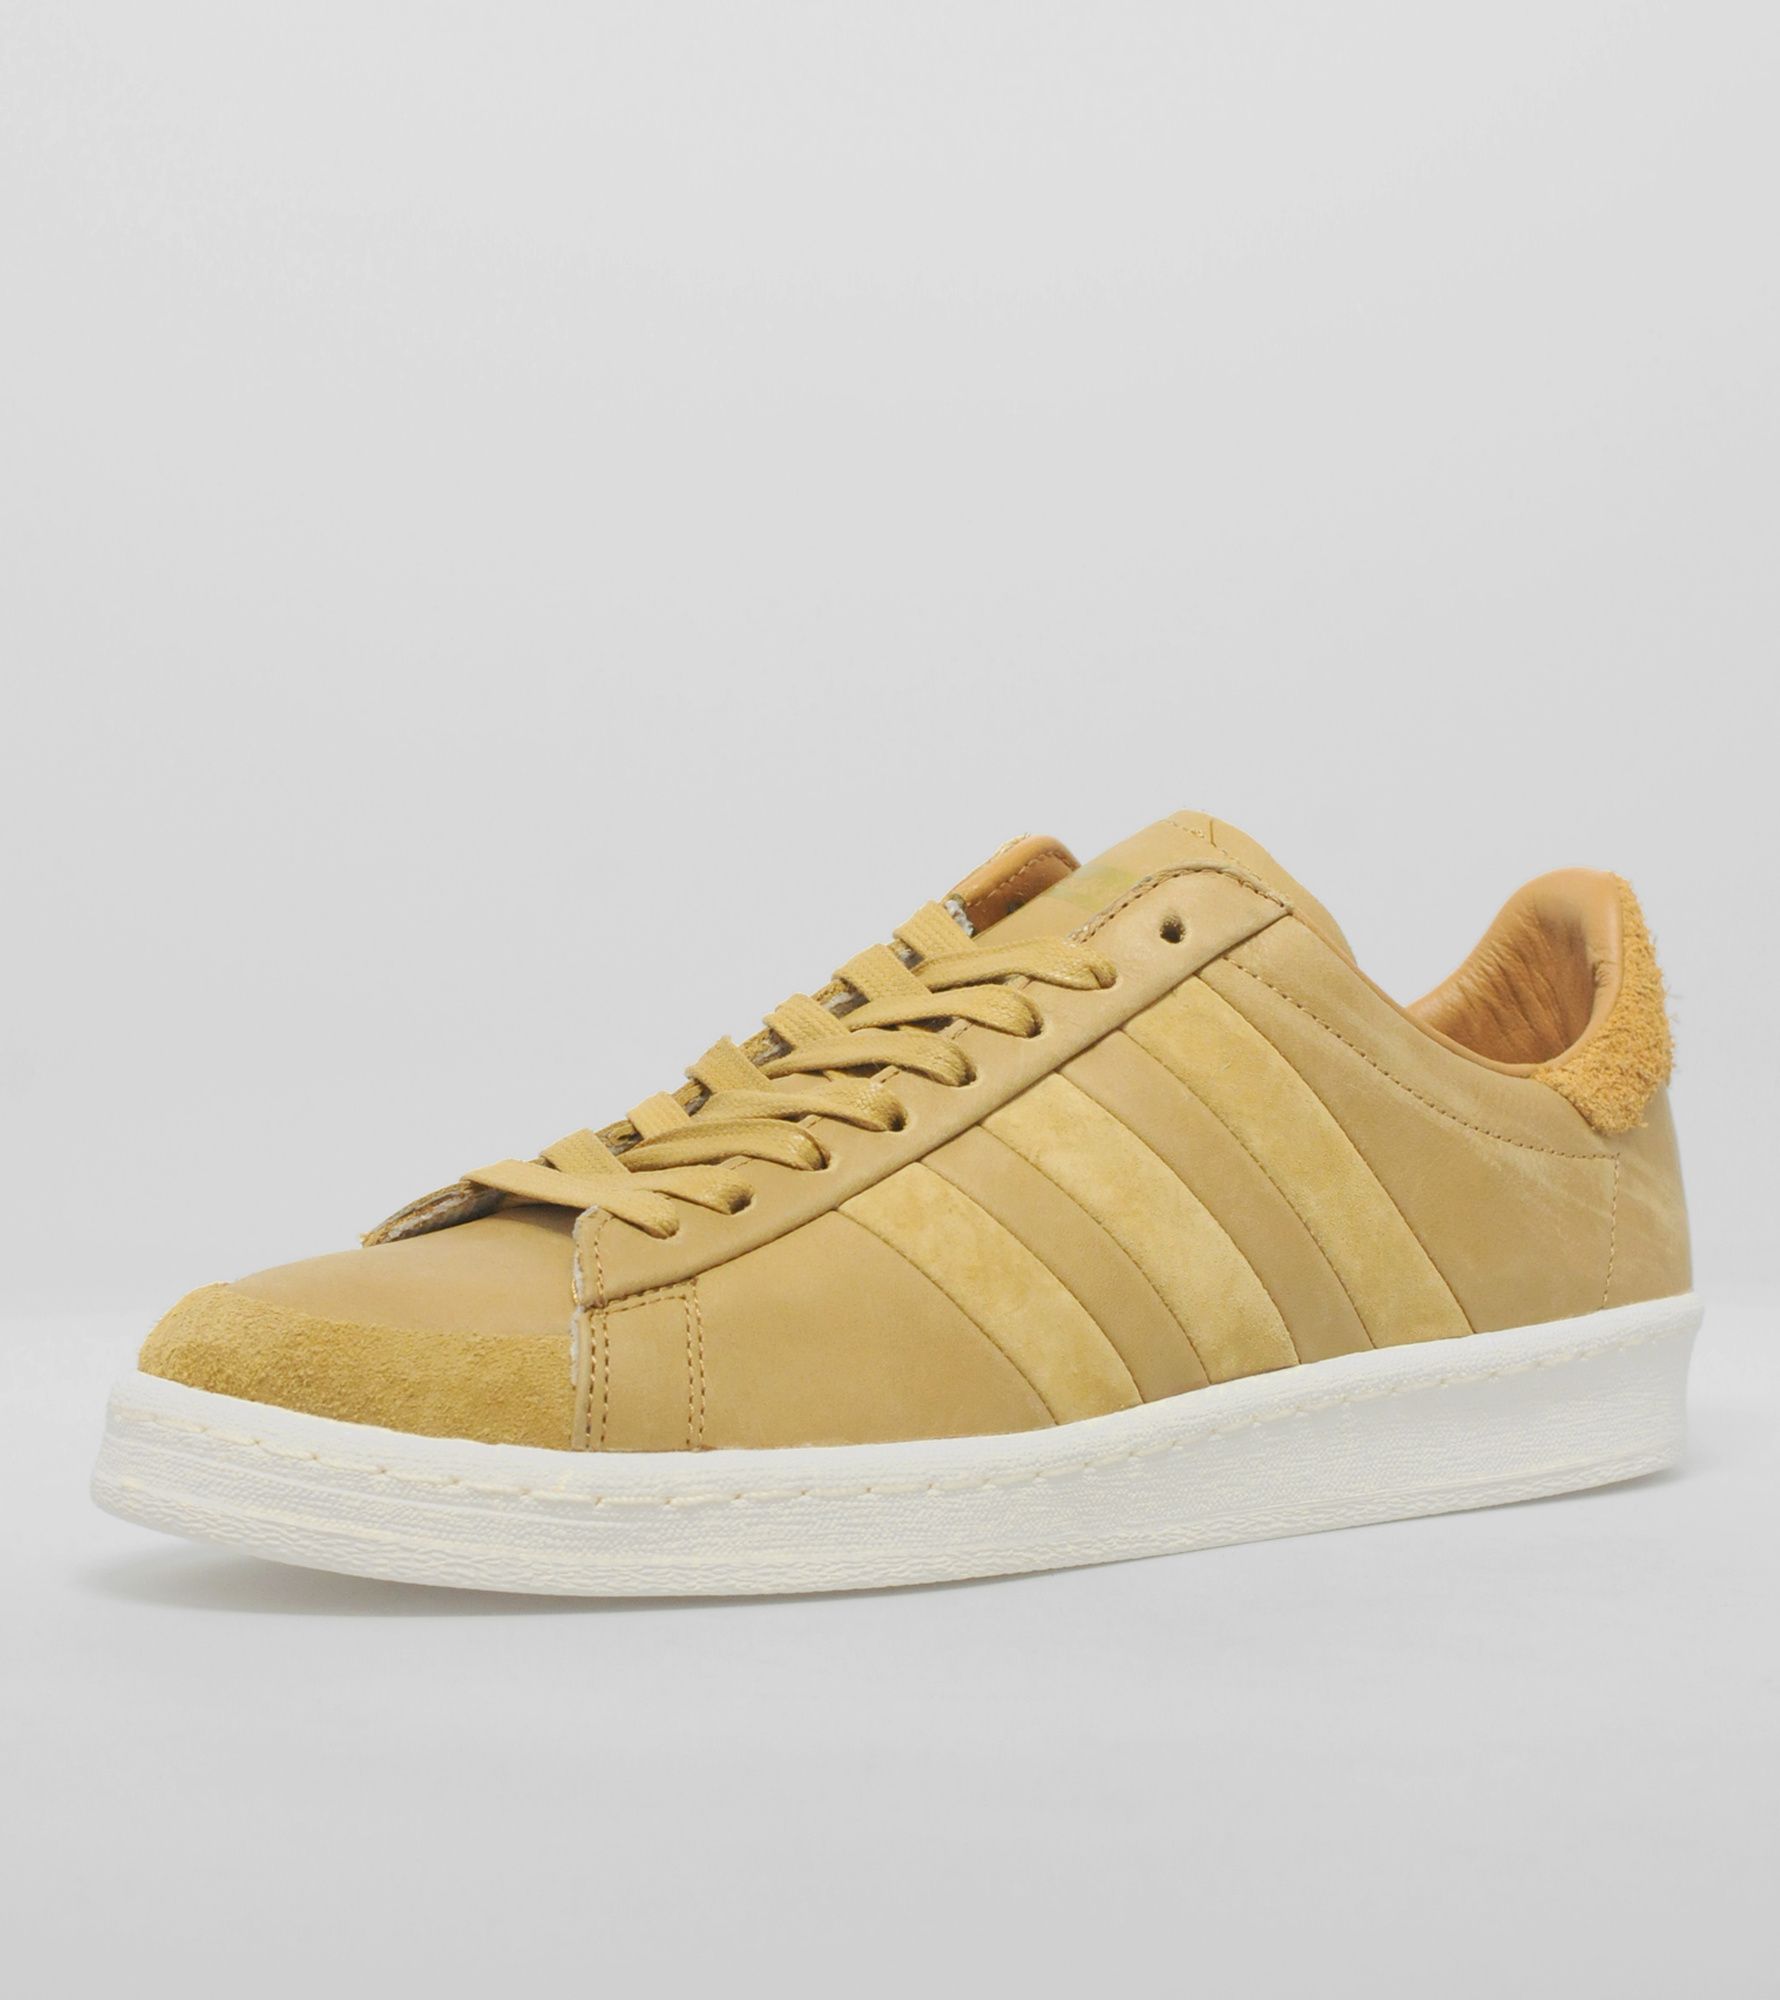 adidas Originals Hook Shot Lo 'Stitch and Turn' - size? exclusive | Size?